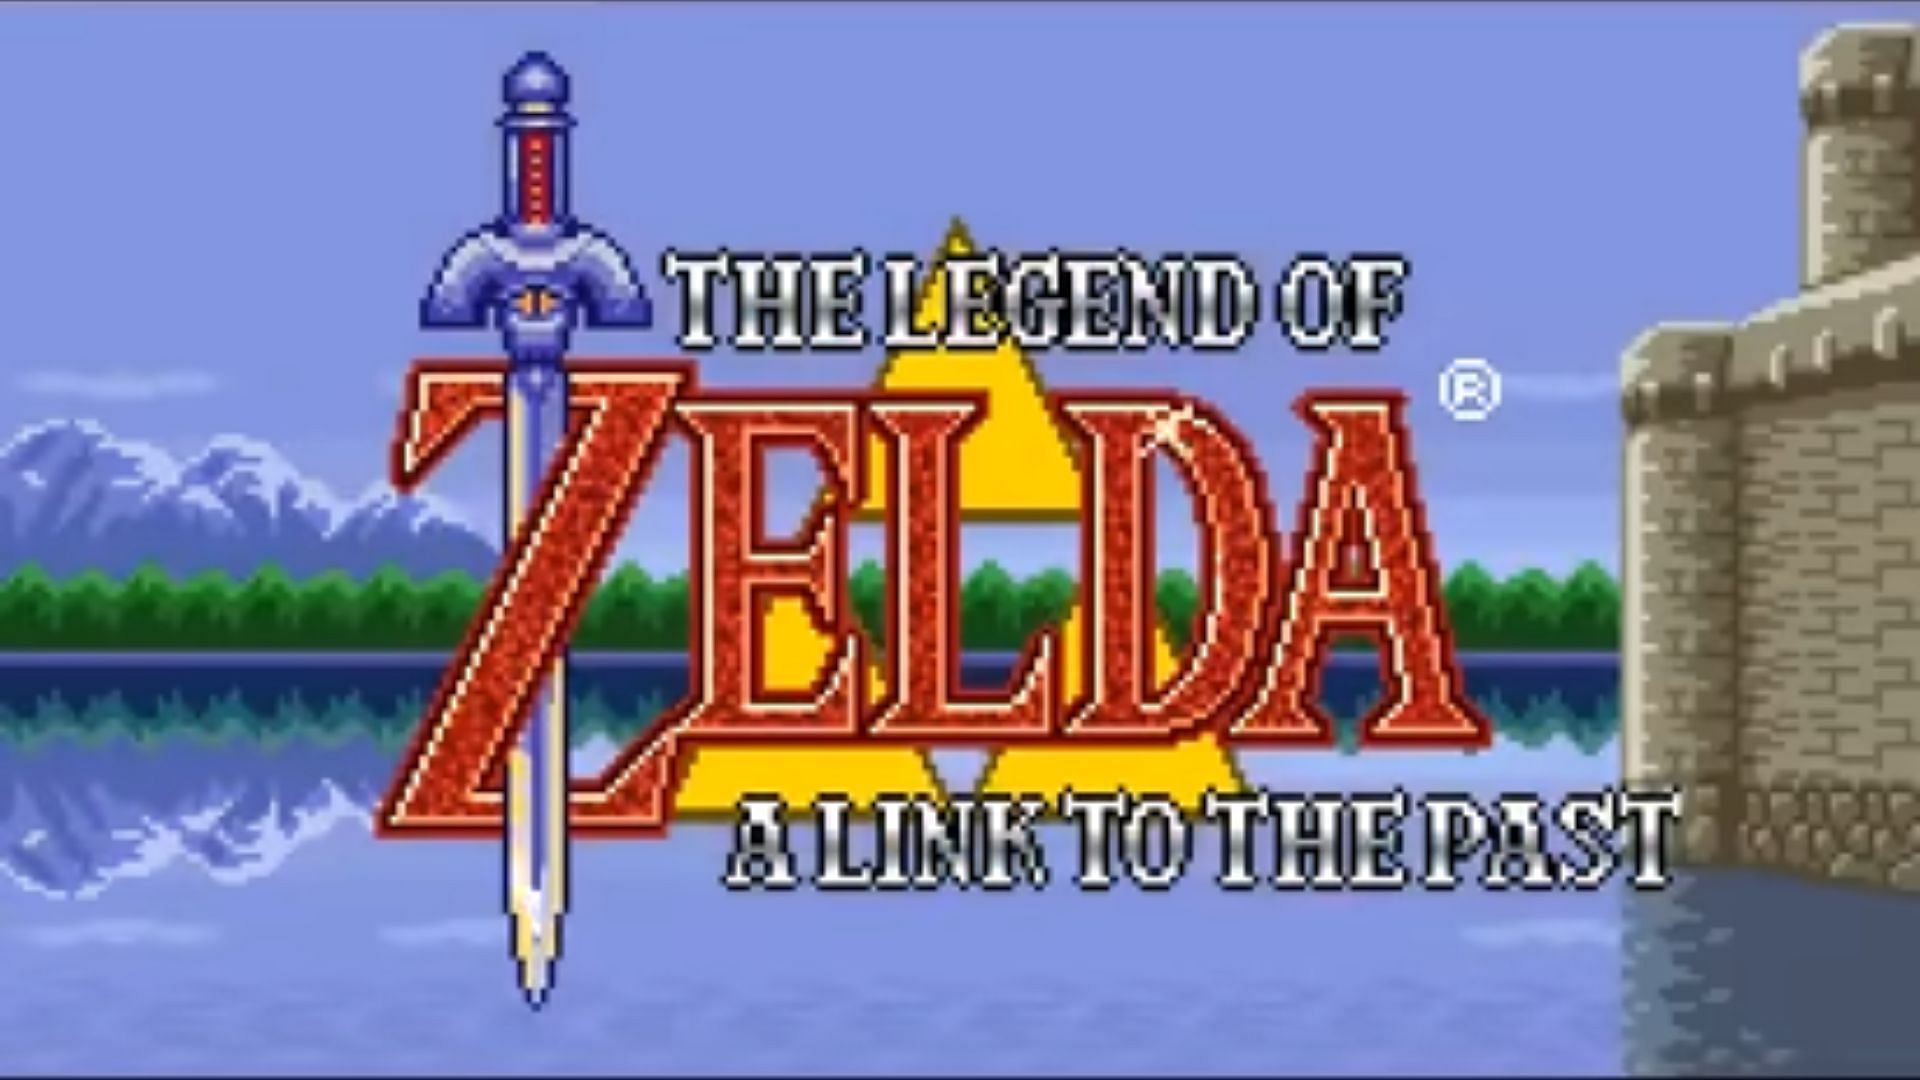 Ranking best Zelda games - A Link to the Past (Image via Nintendo/ World of Longplays on Youtube)